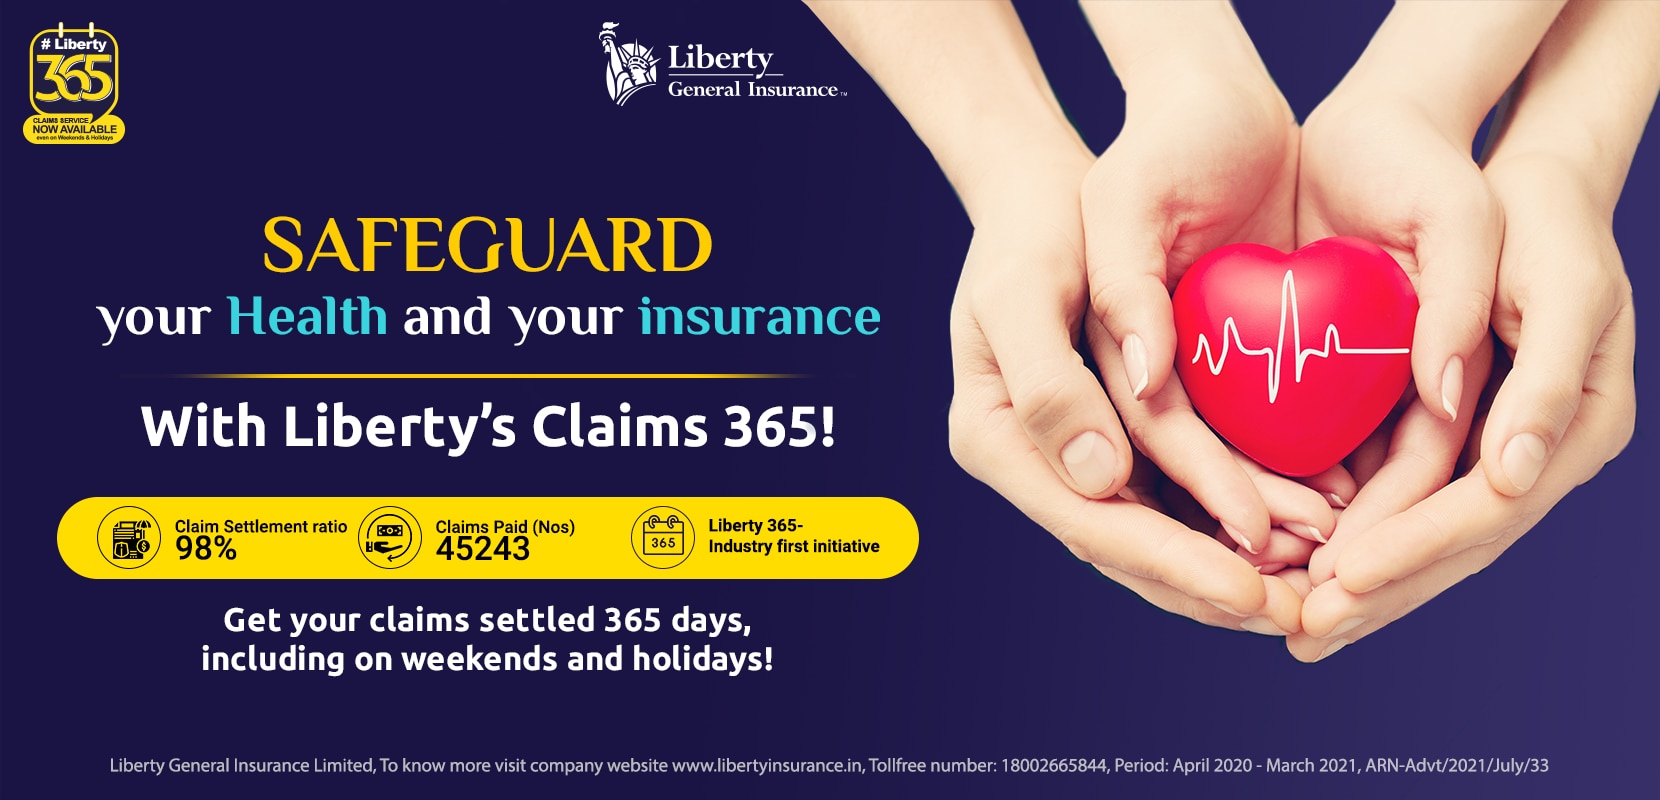 Liberty General Insurance Help People Live Safer with More Security